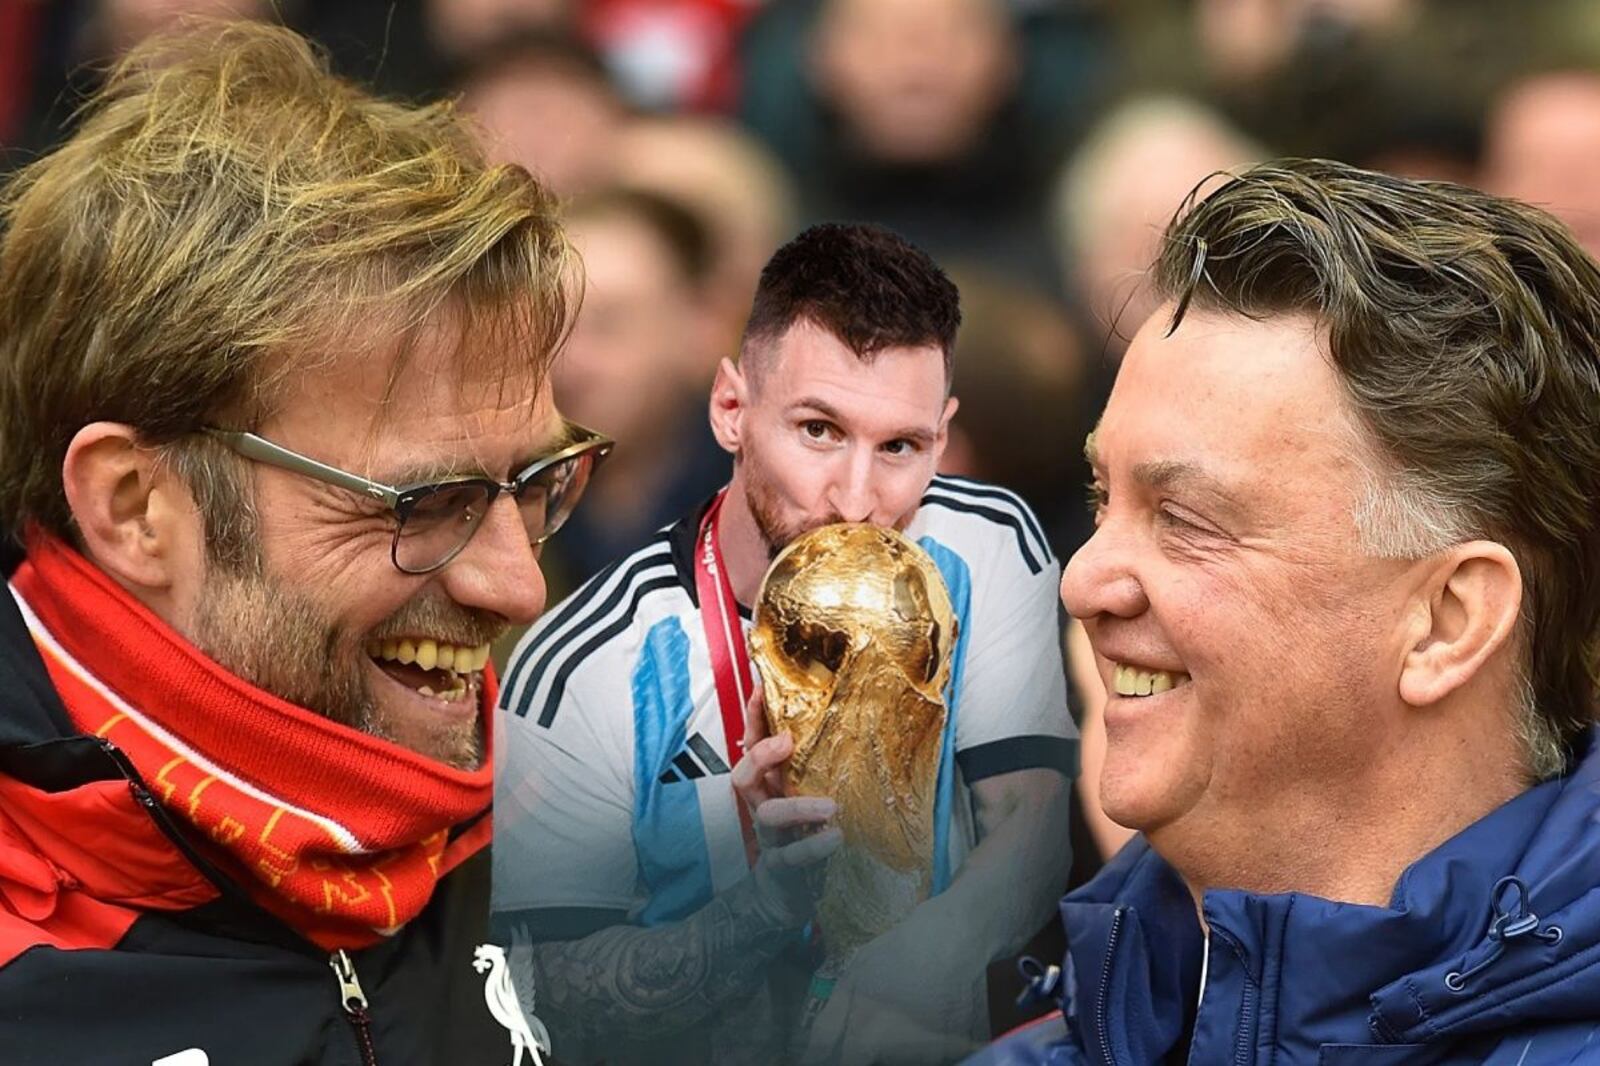 While Van Gaal denounced aid, what Klopp said about Messi and Argentina's World Cup